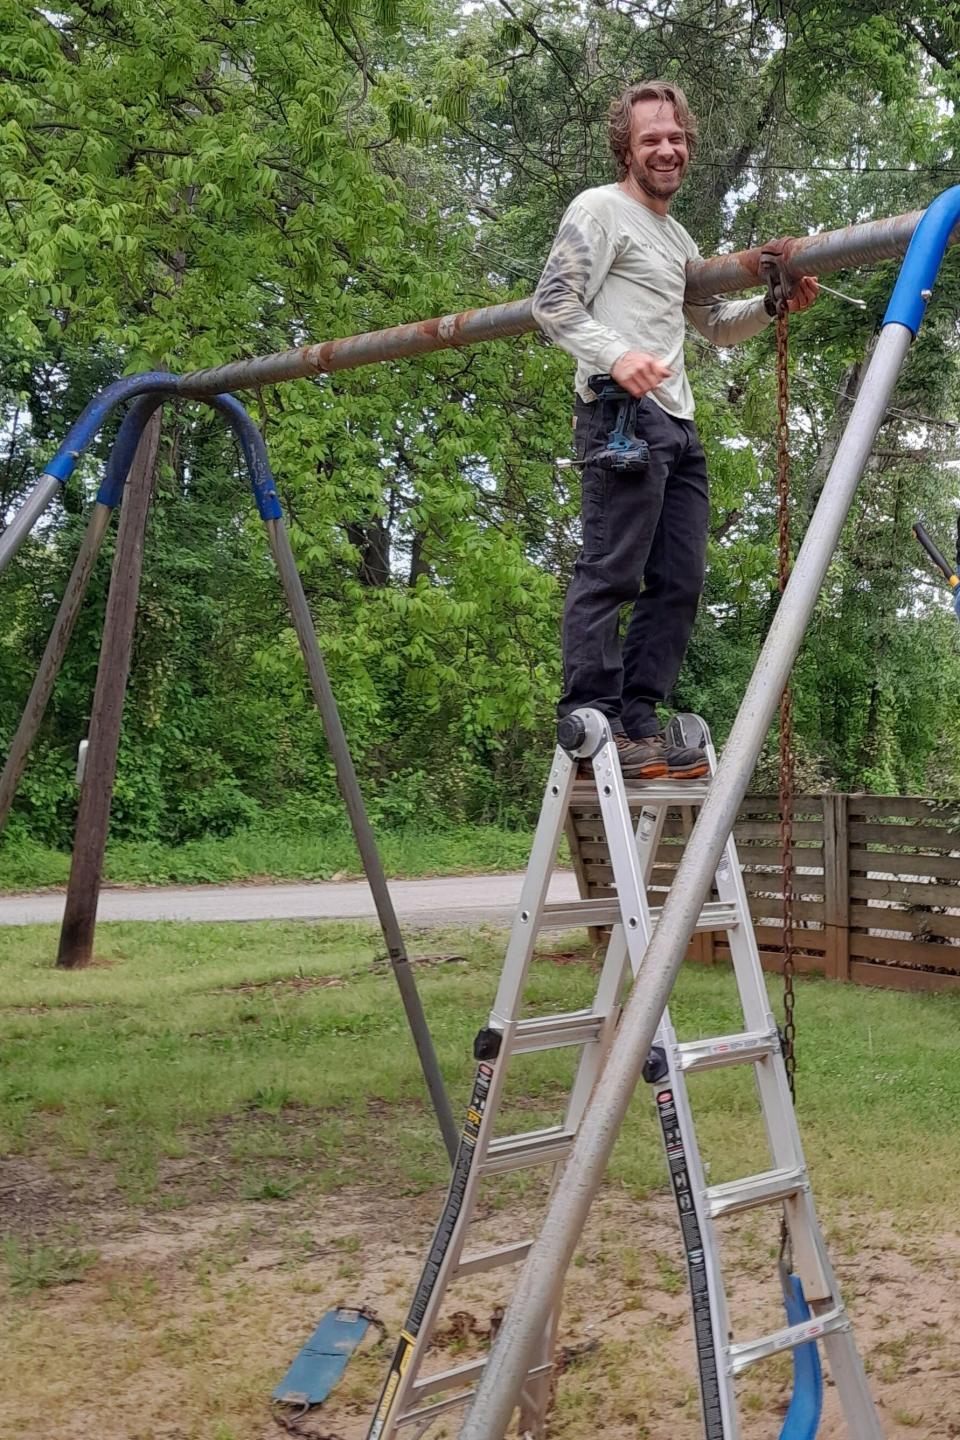 Tee Thompson replaces chains and swings at Verner Springs Park in the Sans Souci neighborhood.